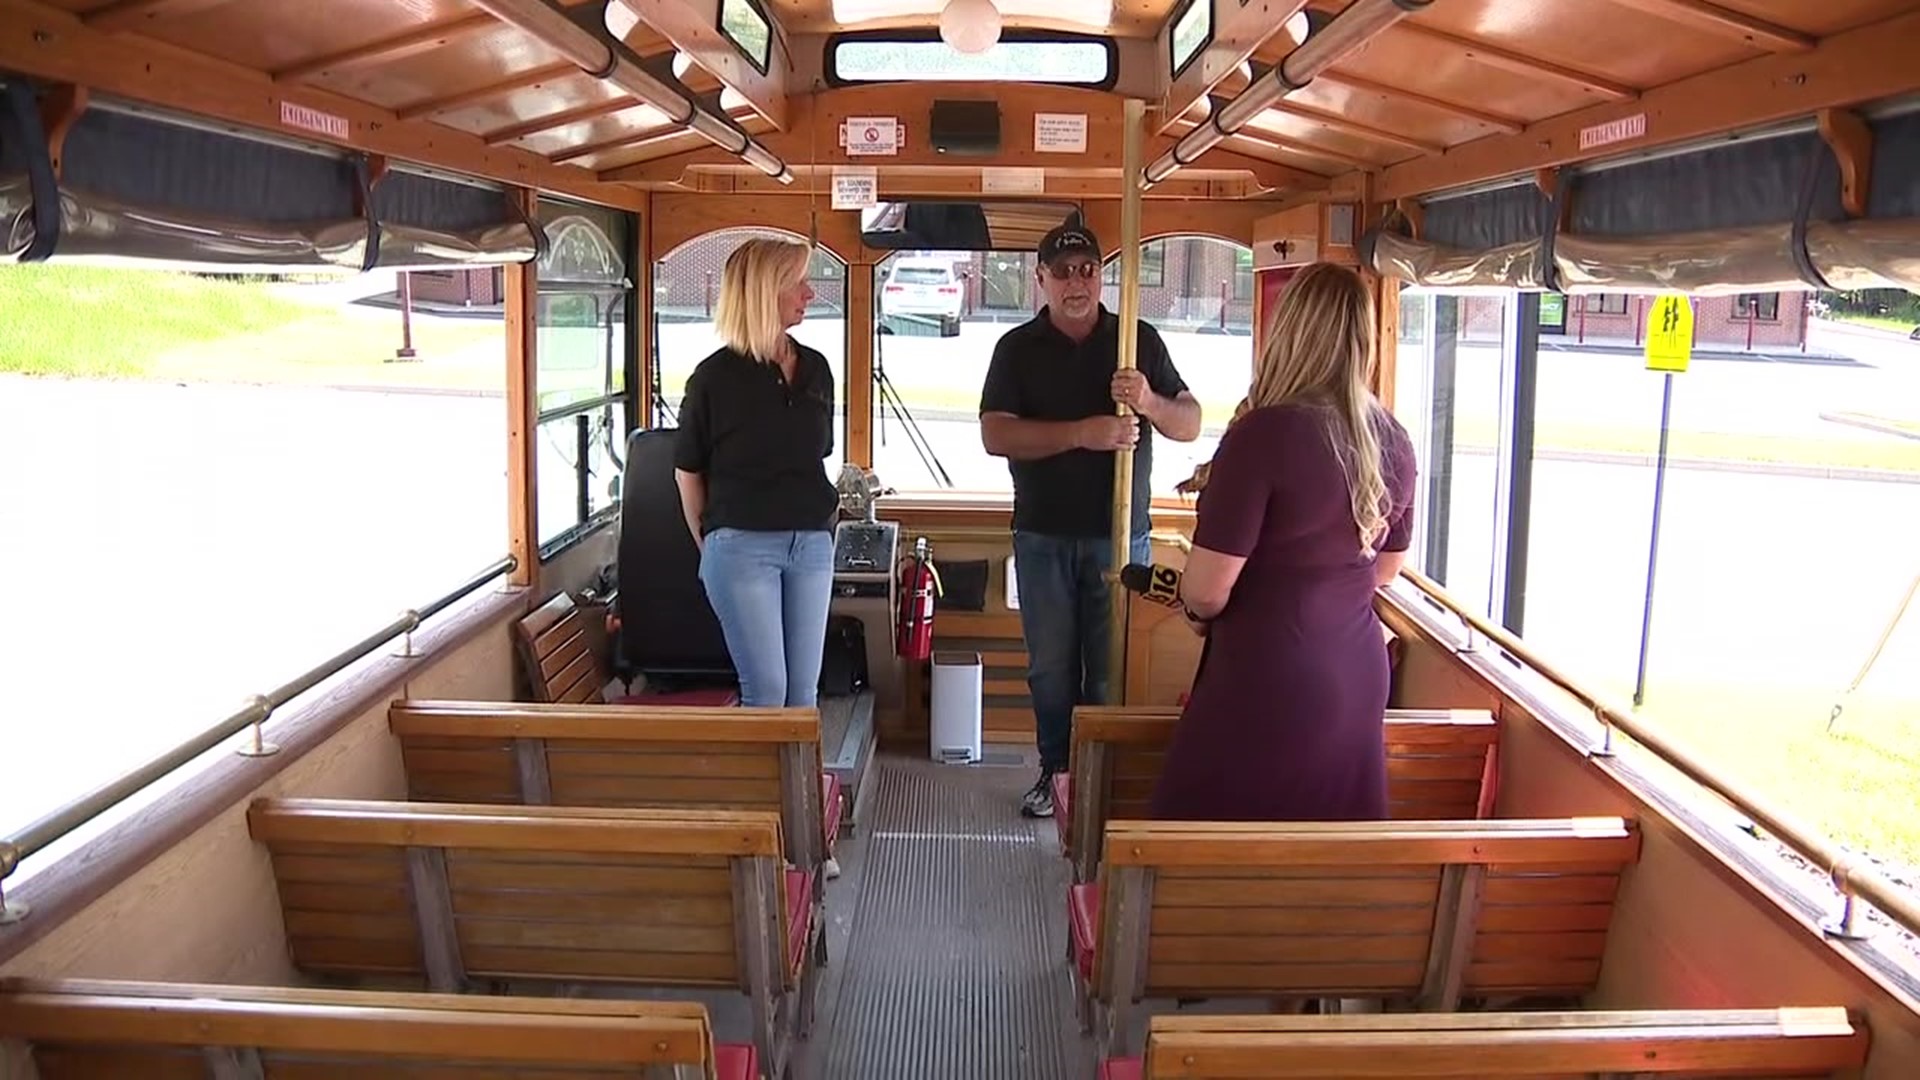 The trolley tours will showcase some of the history in downtown Jim Thorpe and its surrounding areas.